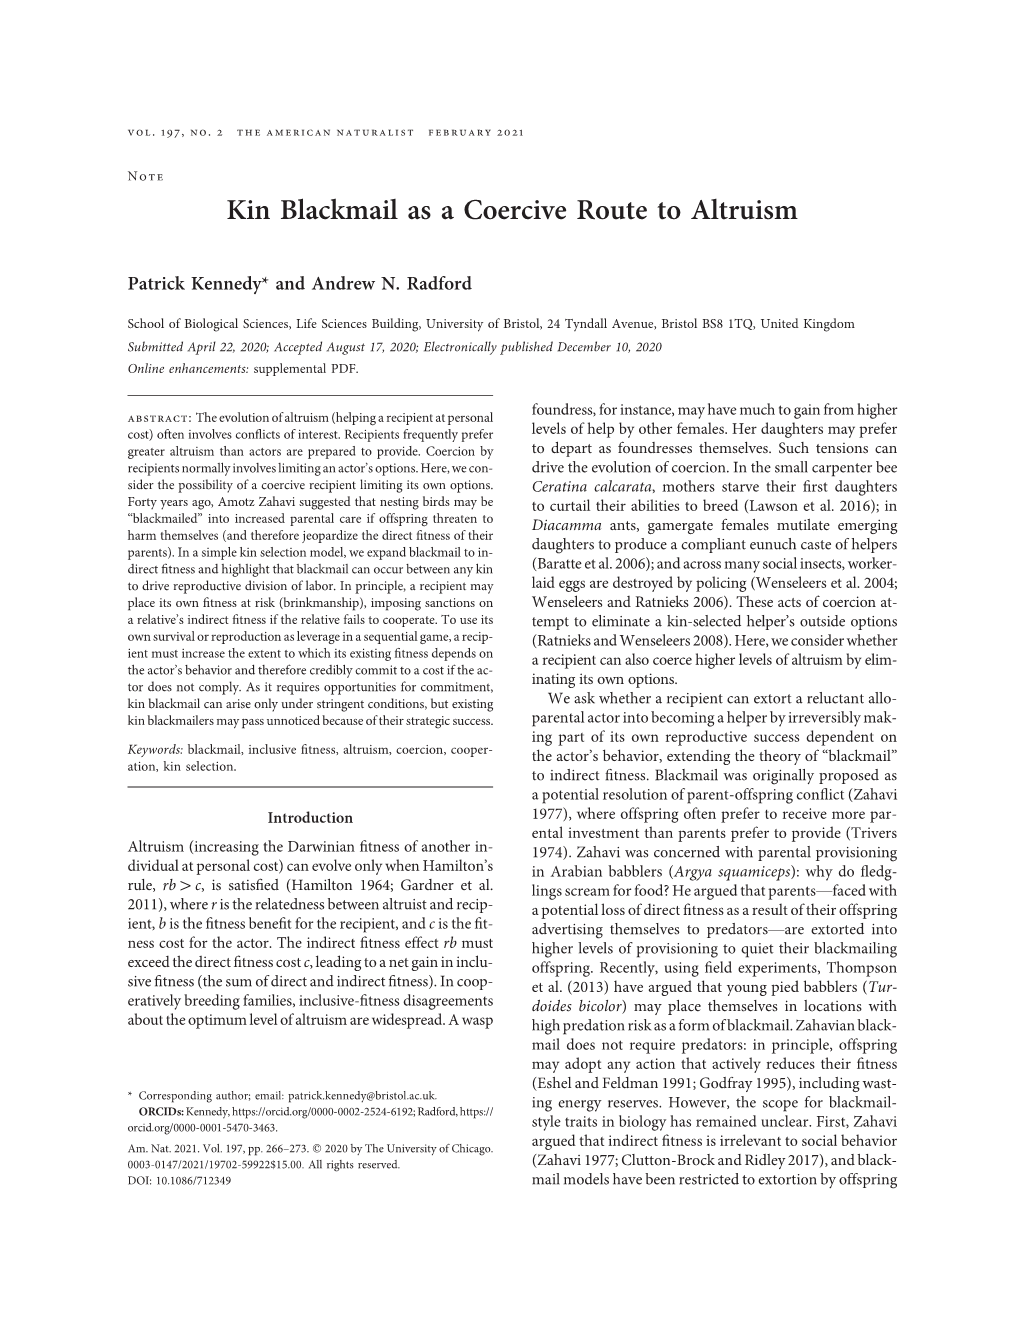 Kin Blackmail As a Coercive Route to Altruism